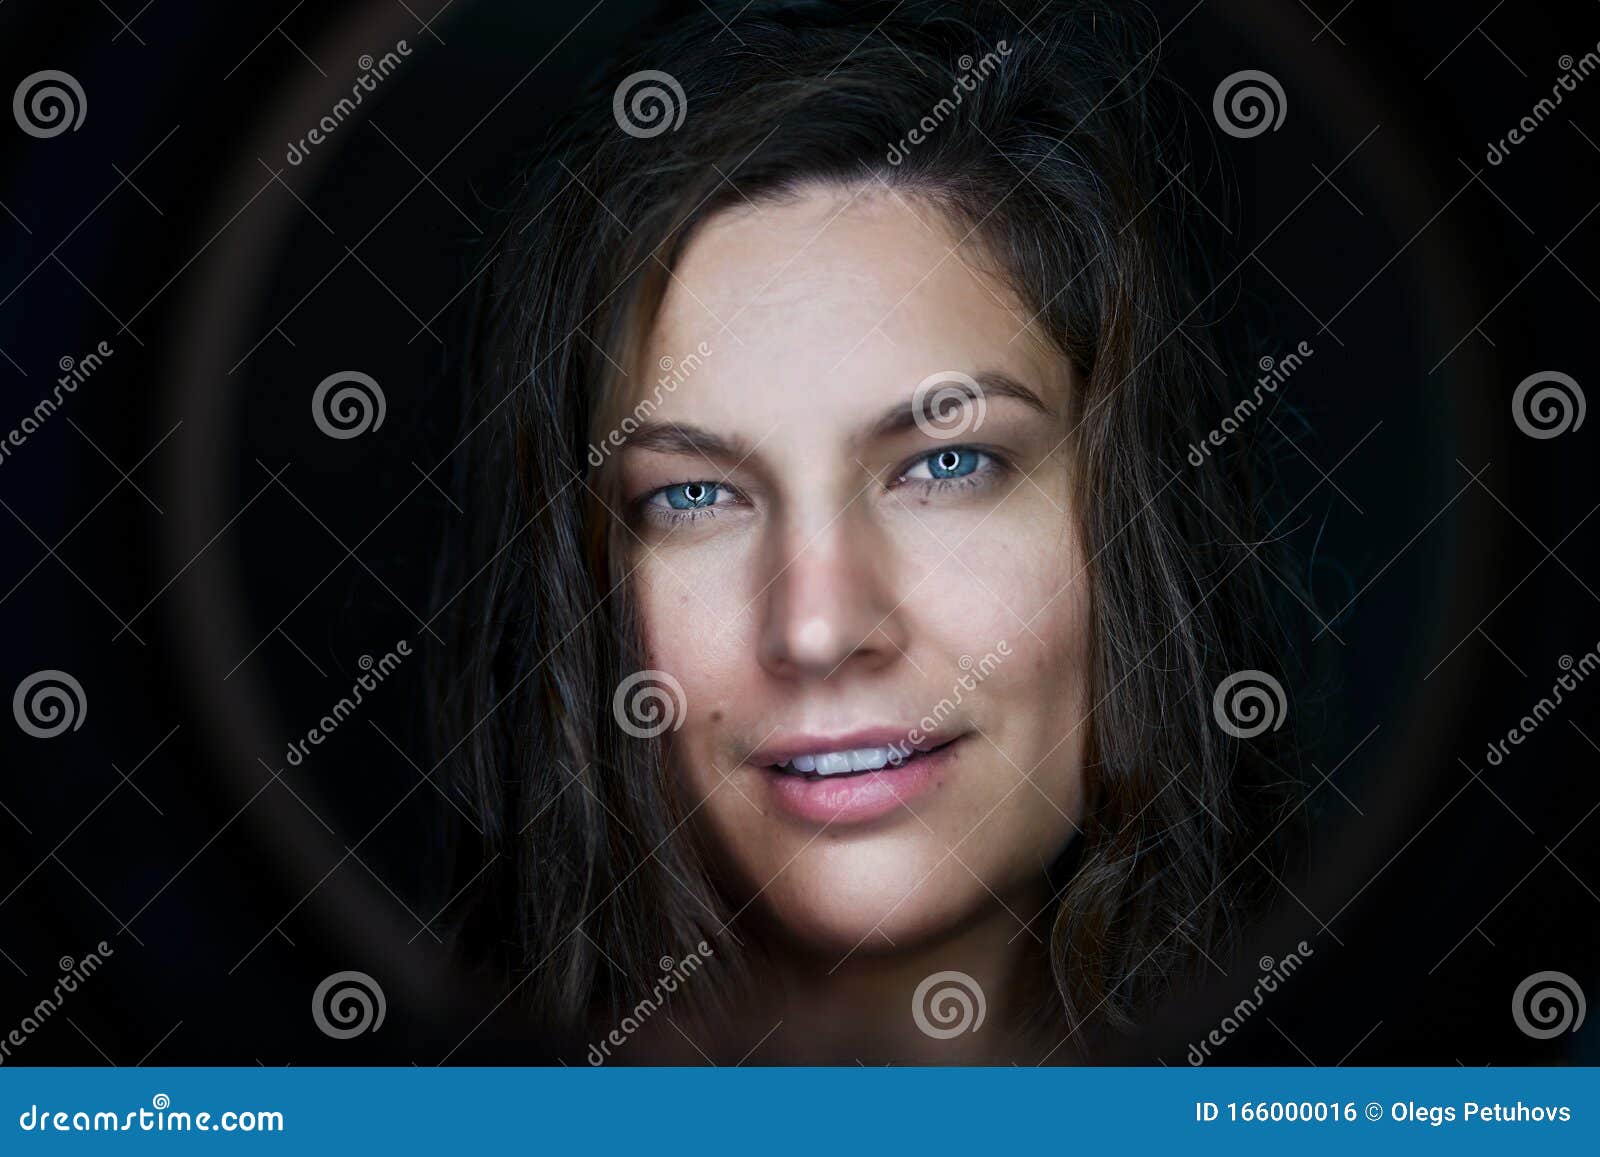 6. "Gorgeous blue-eyed woman with dark hair" - wide 4